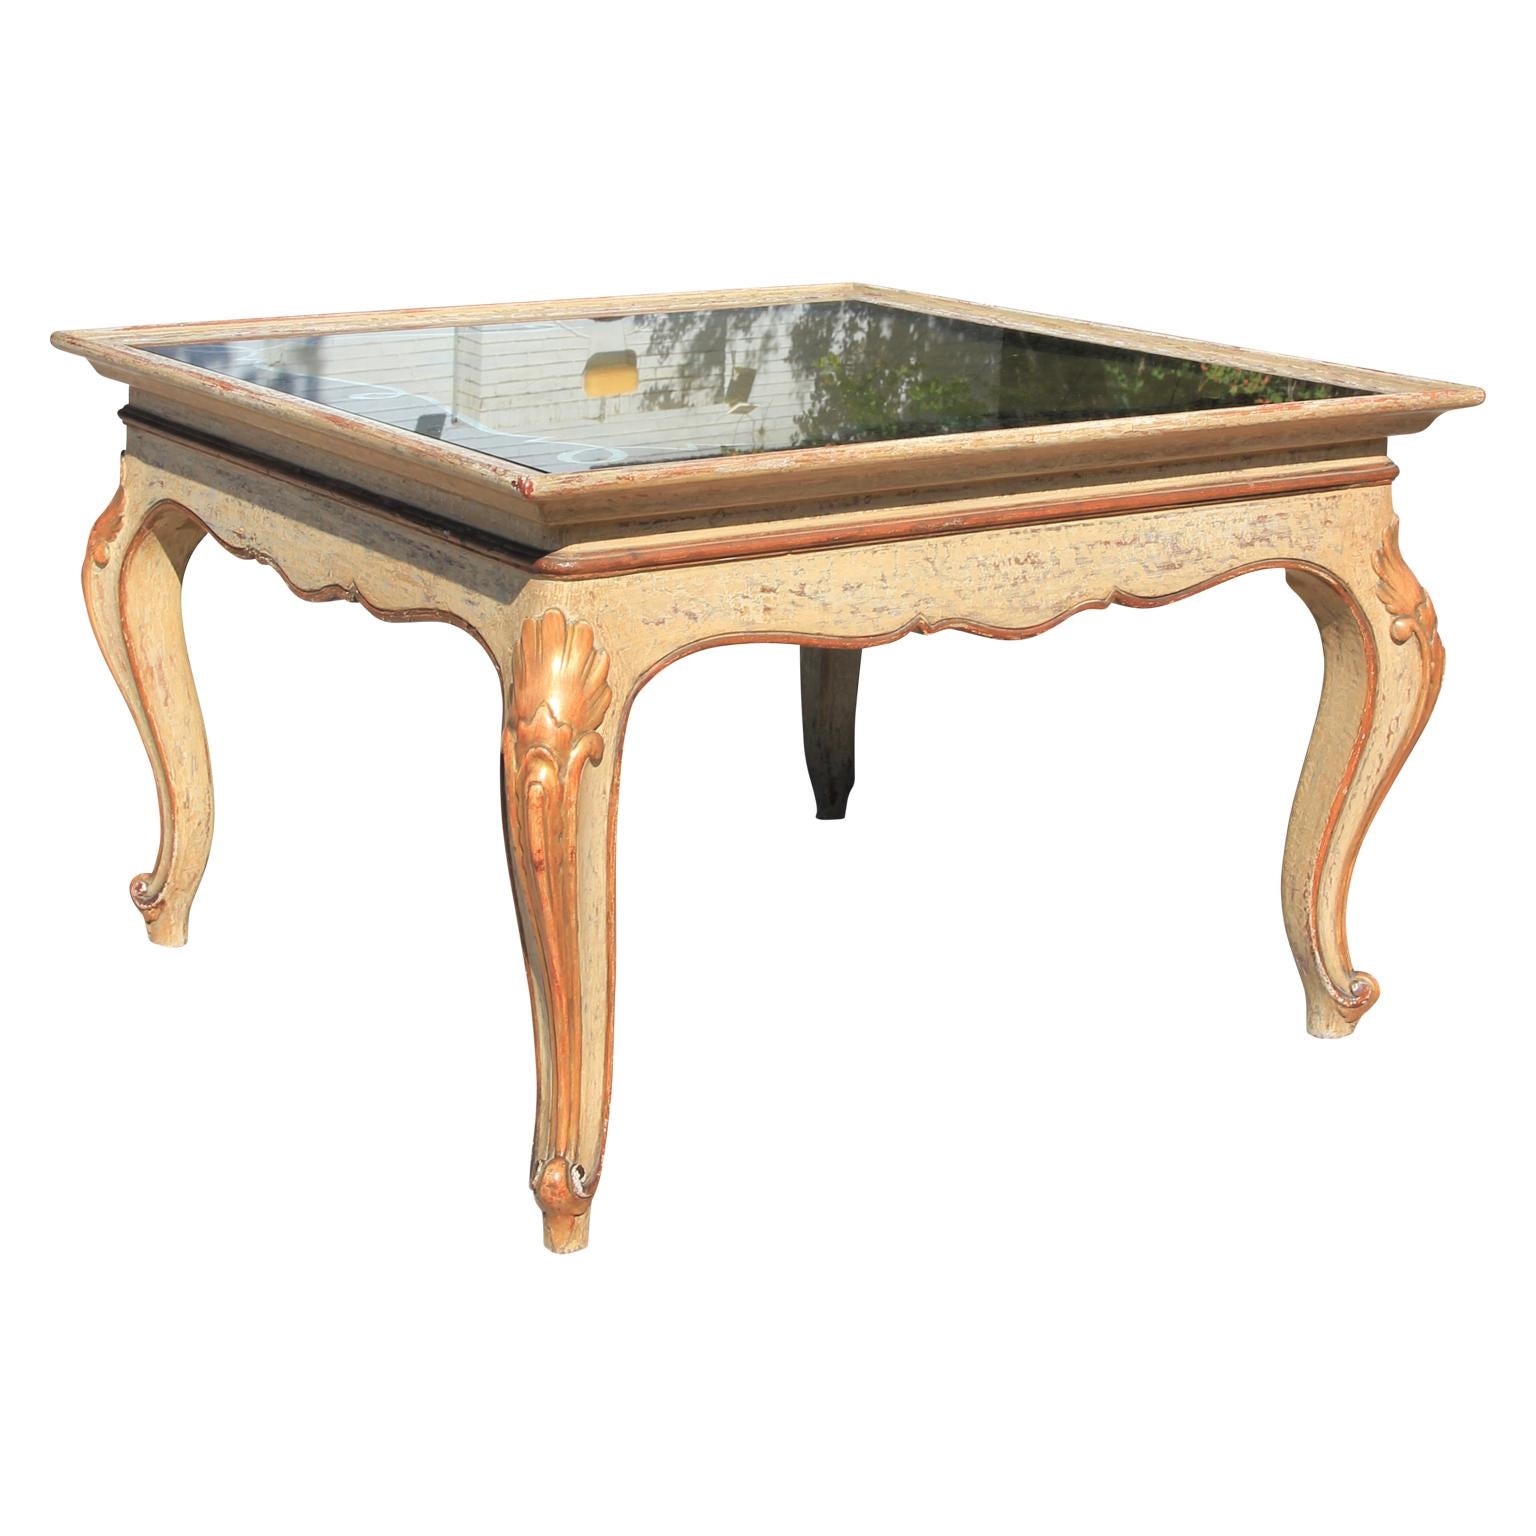 Painted Gold Italian Reverse Painting Glass Occasional Square Table